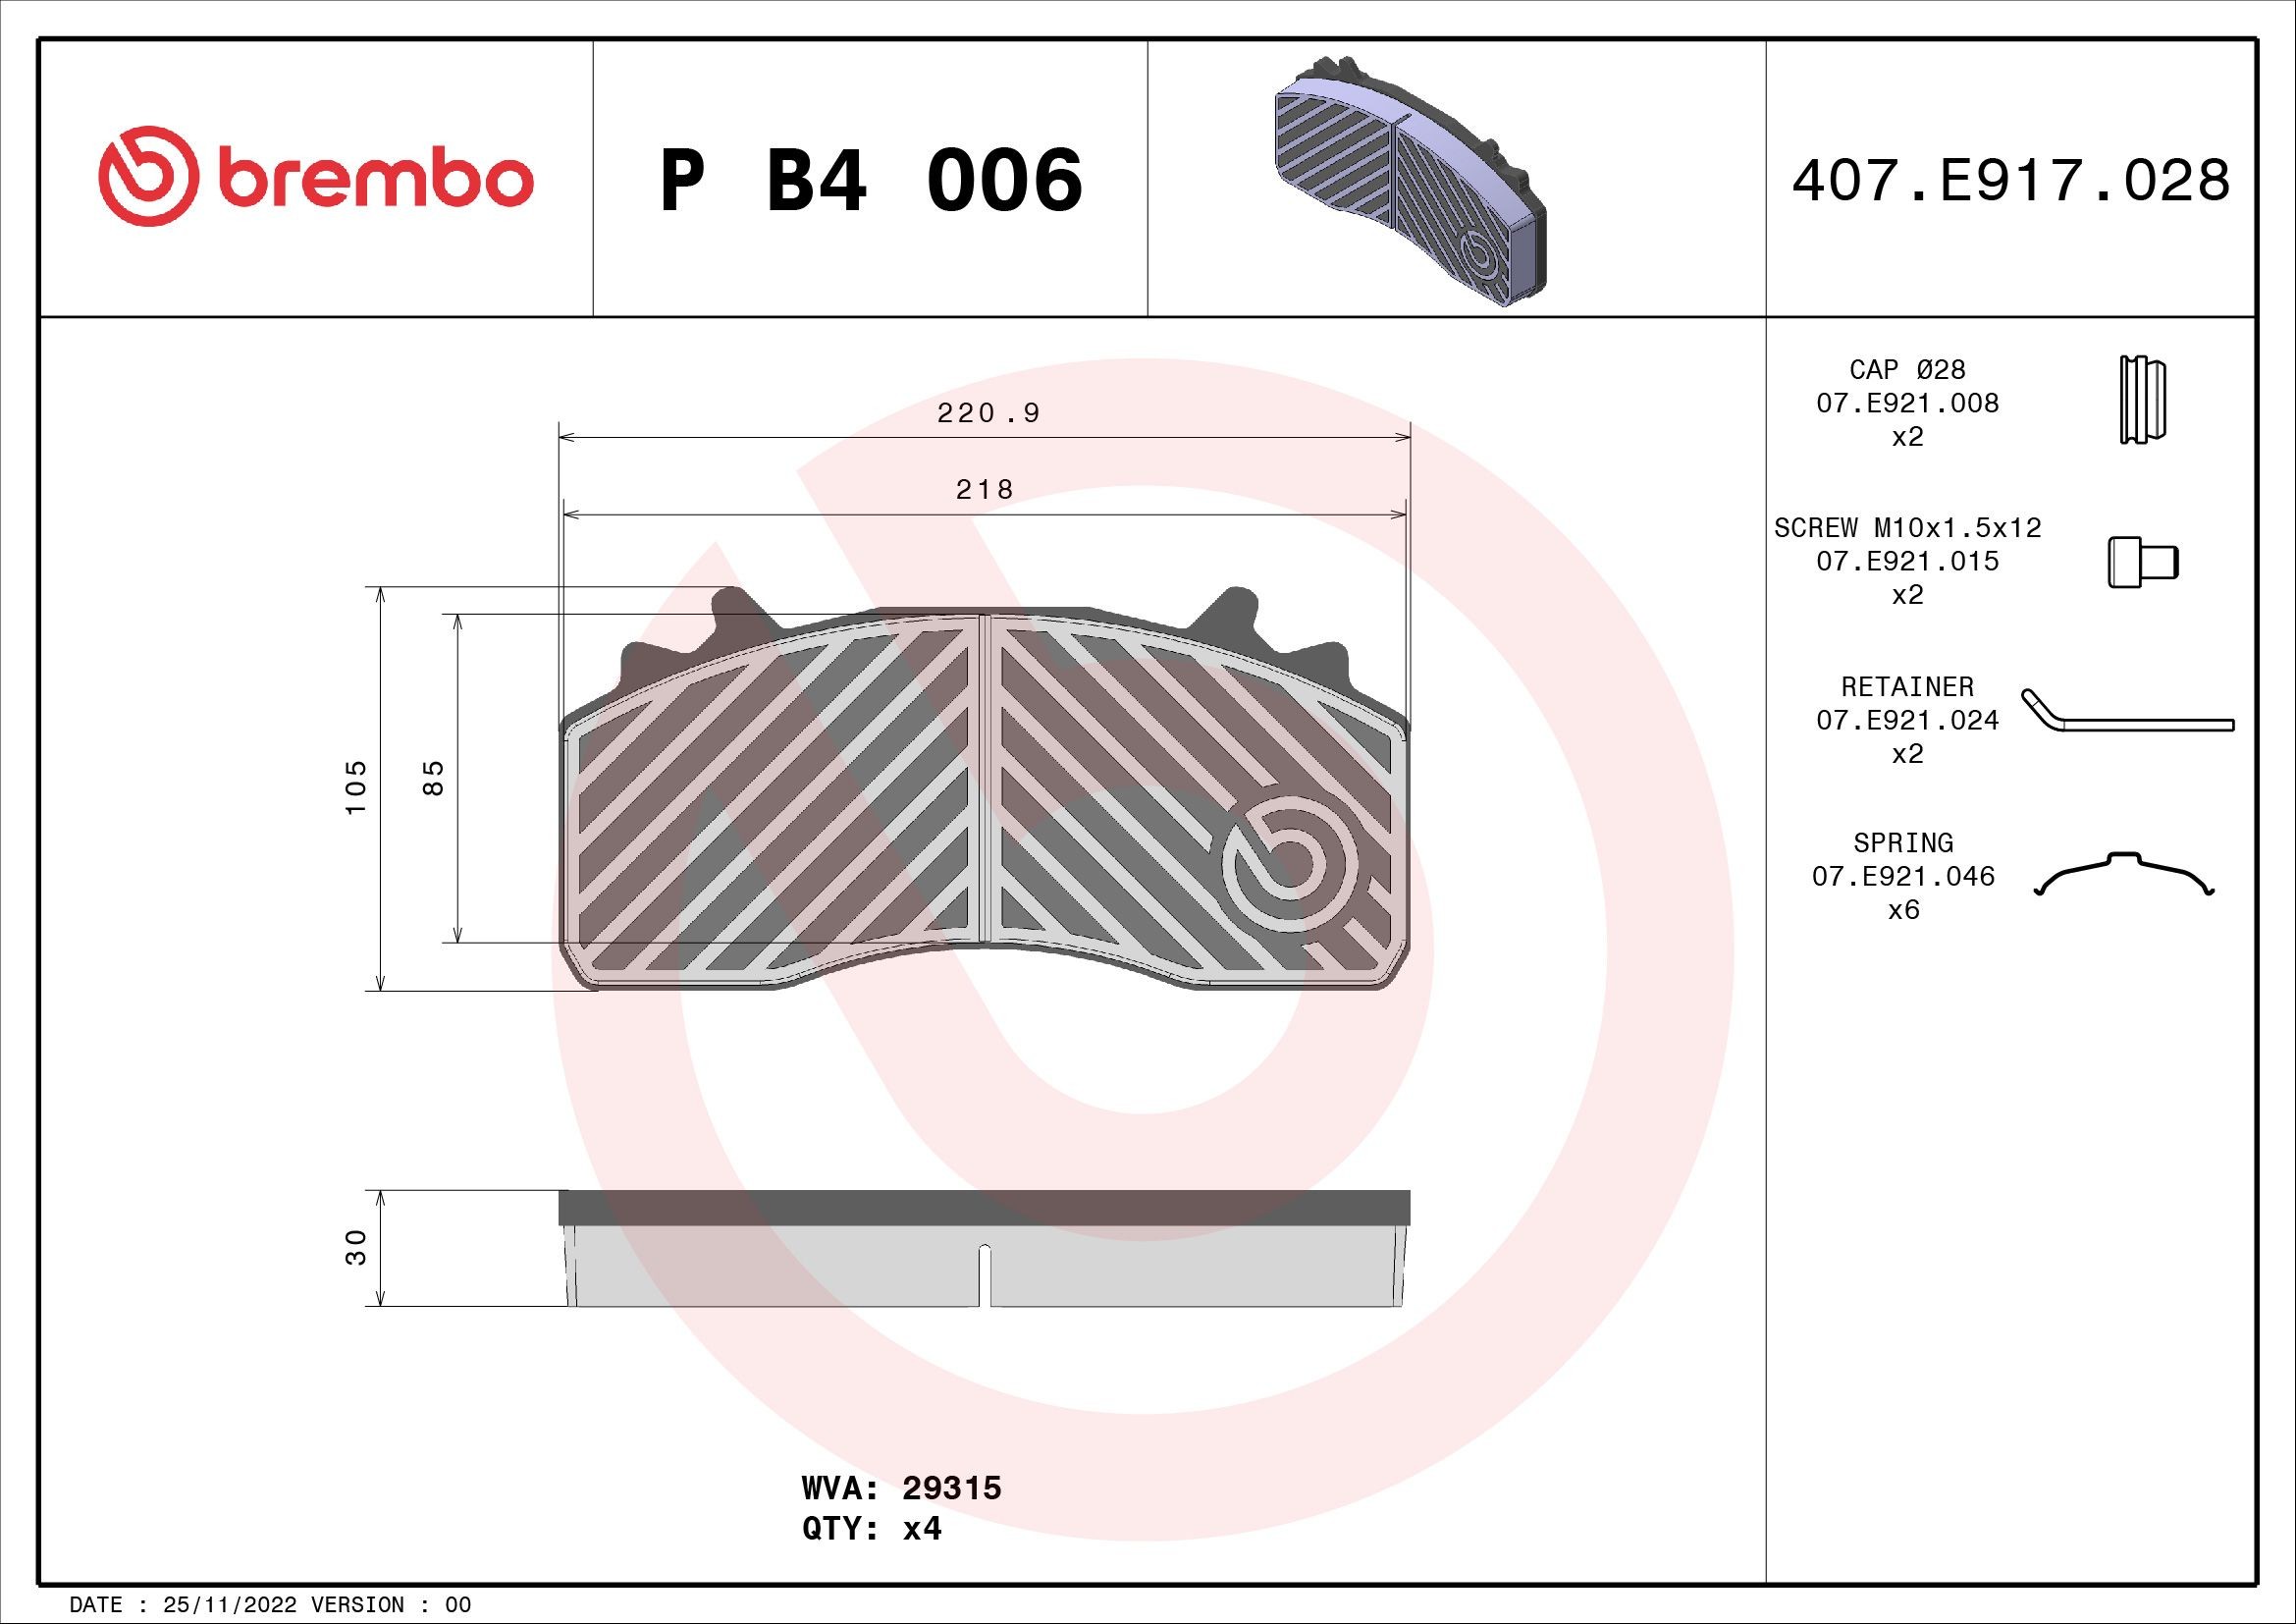 BREMBO P B4 006 Brake pad set excl. wear warning contact, with accessories